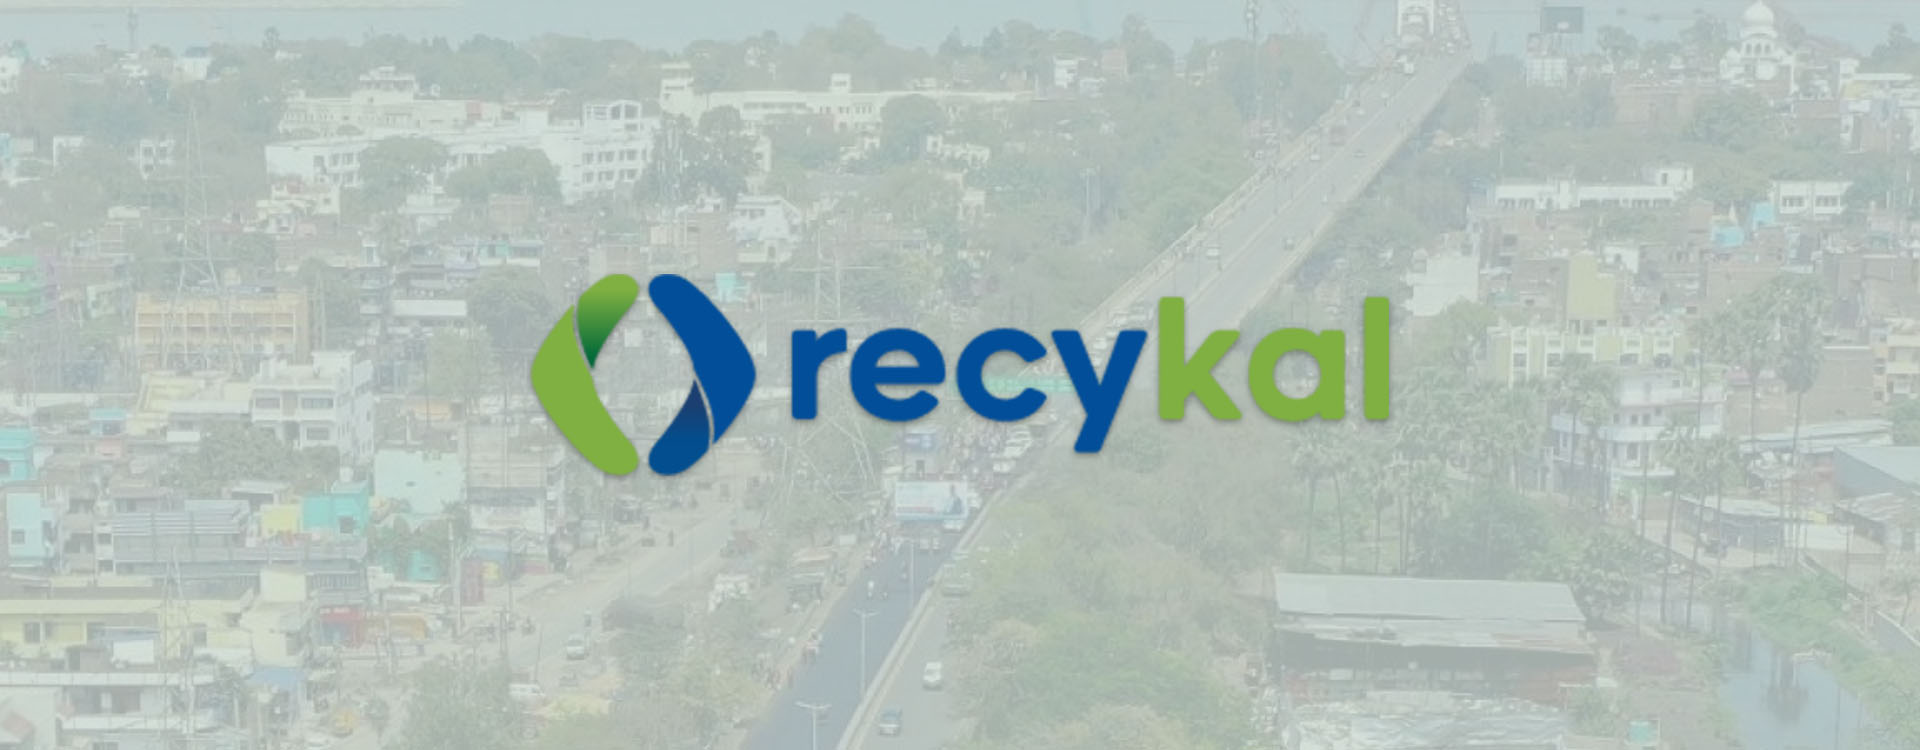 Recykal: Turning Waste Management into A Legacy